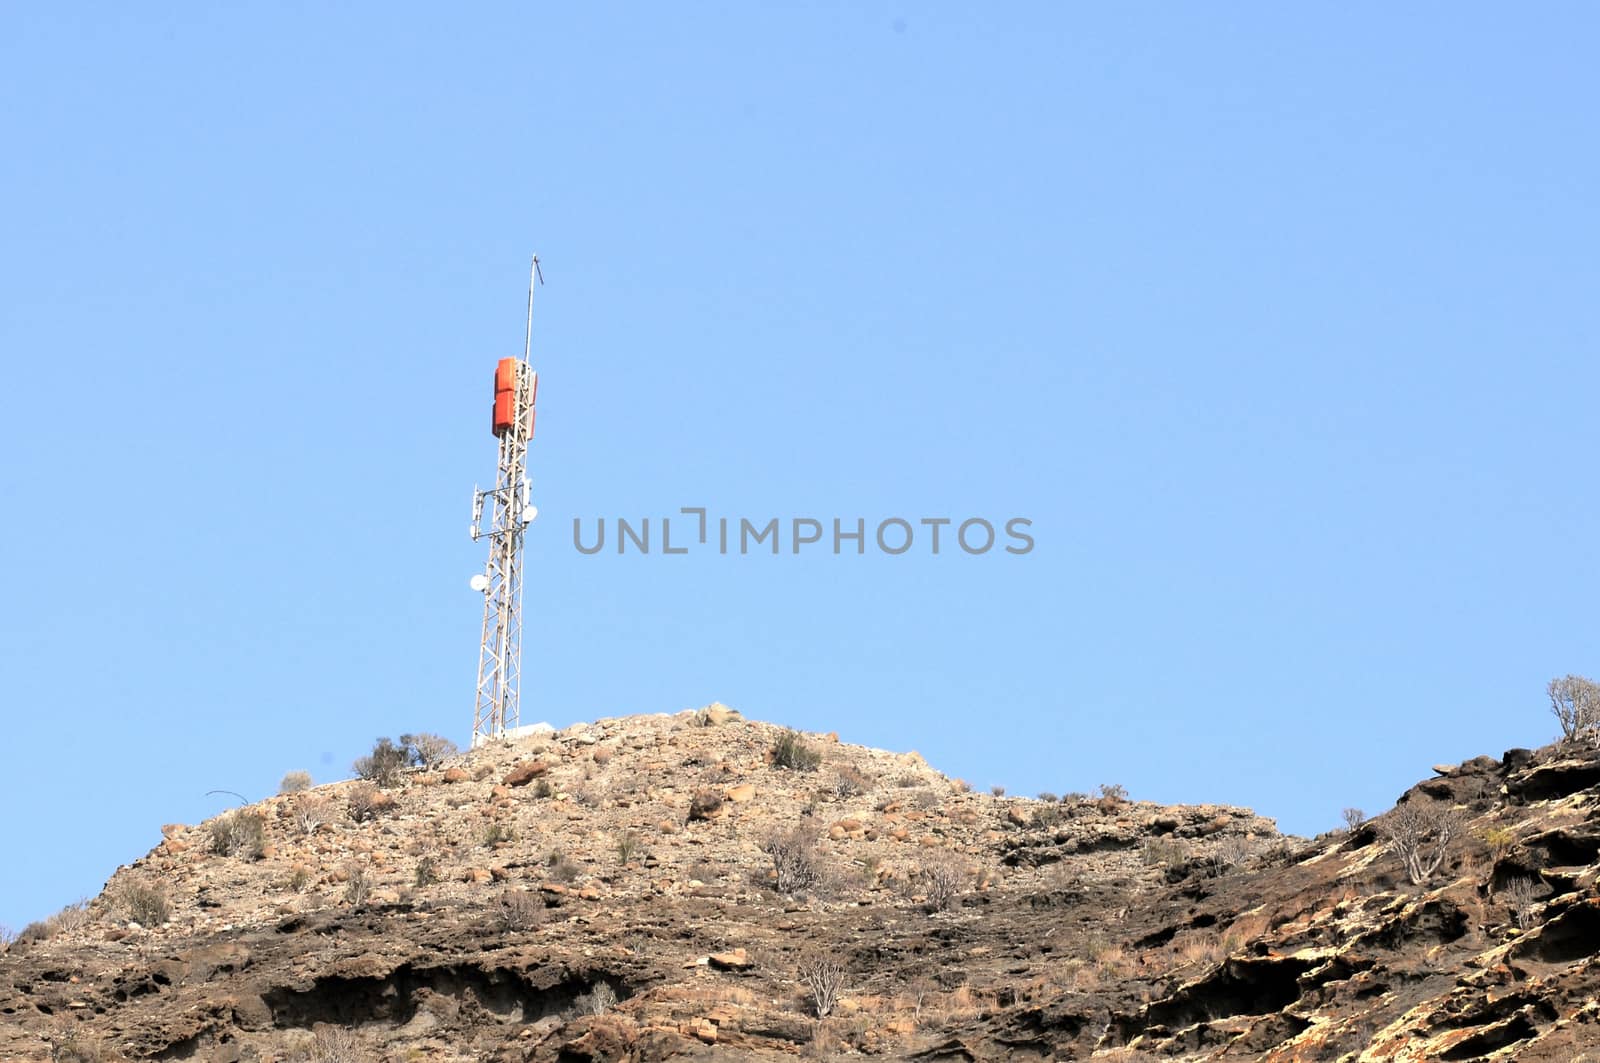 Some Antennas on the top of a Hill